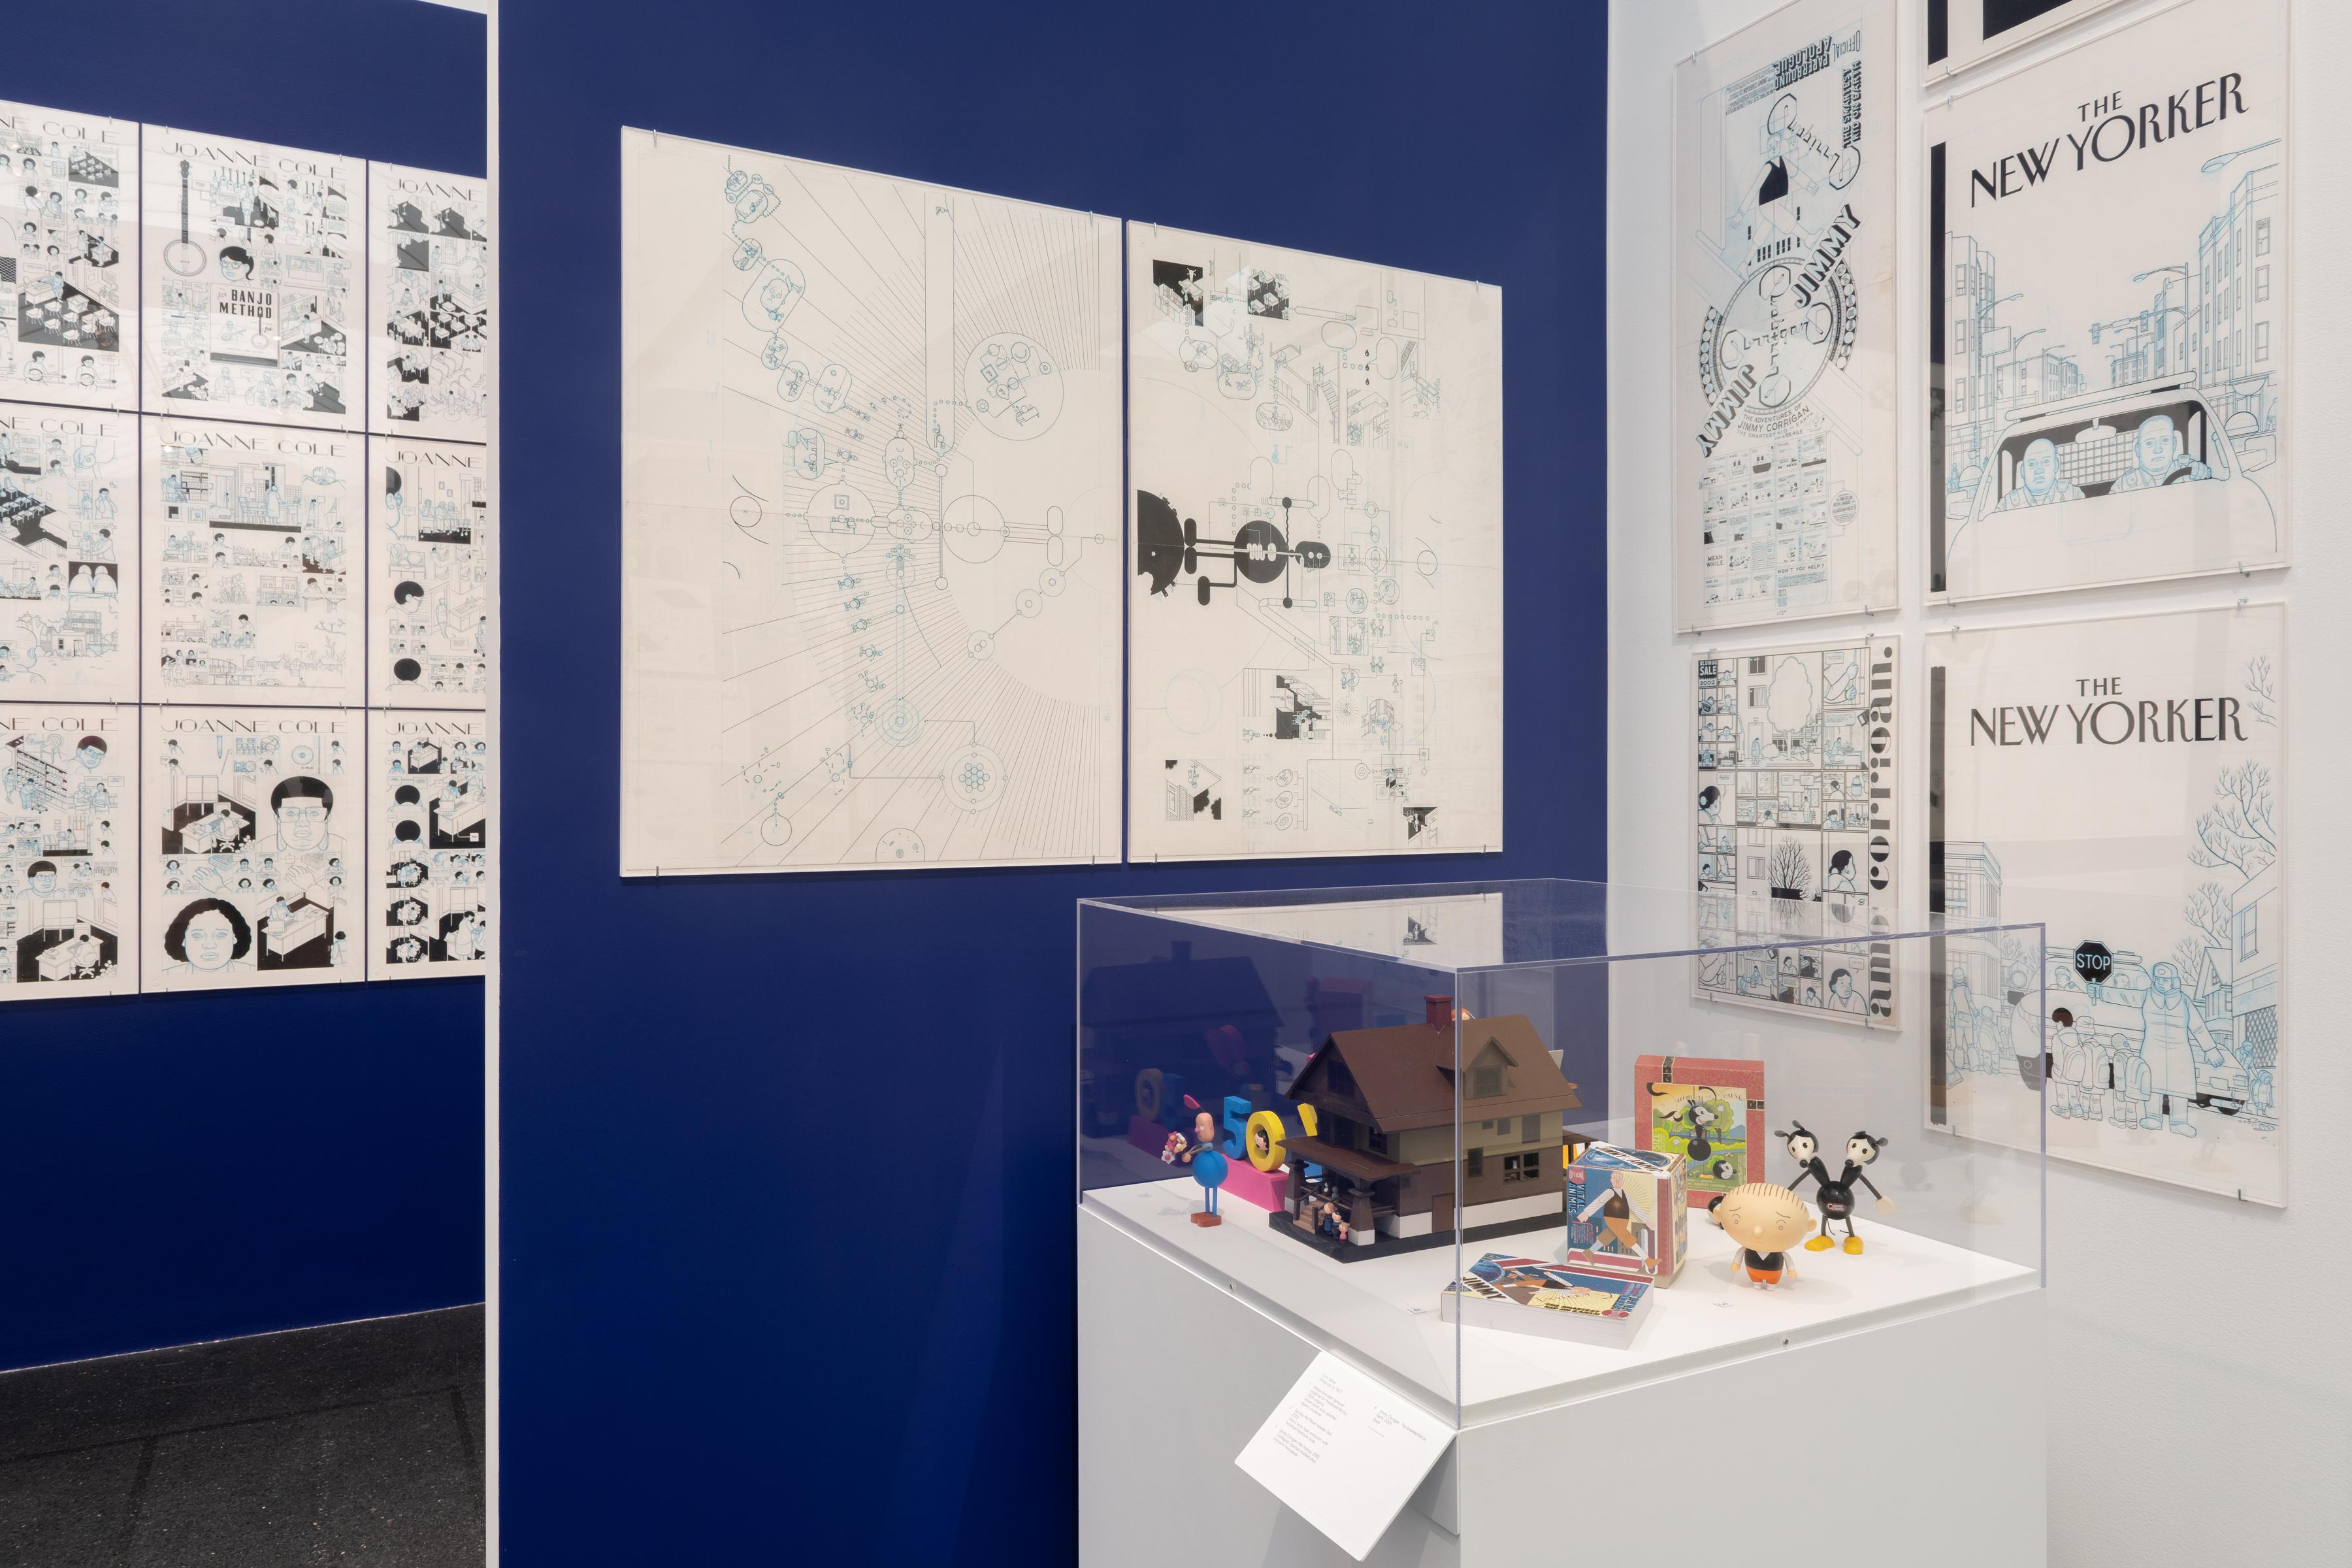 A view of two rooms separated by a blue divider. On the walls are several different comics and drawings, including two New Yorker covers. On a podium in the foreground is several small 3D models of different things.